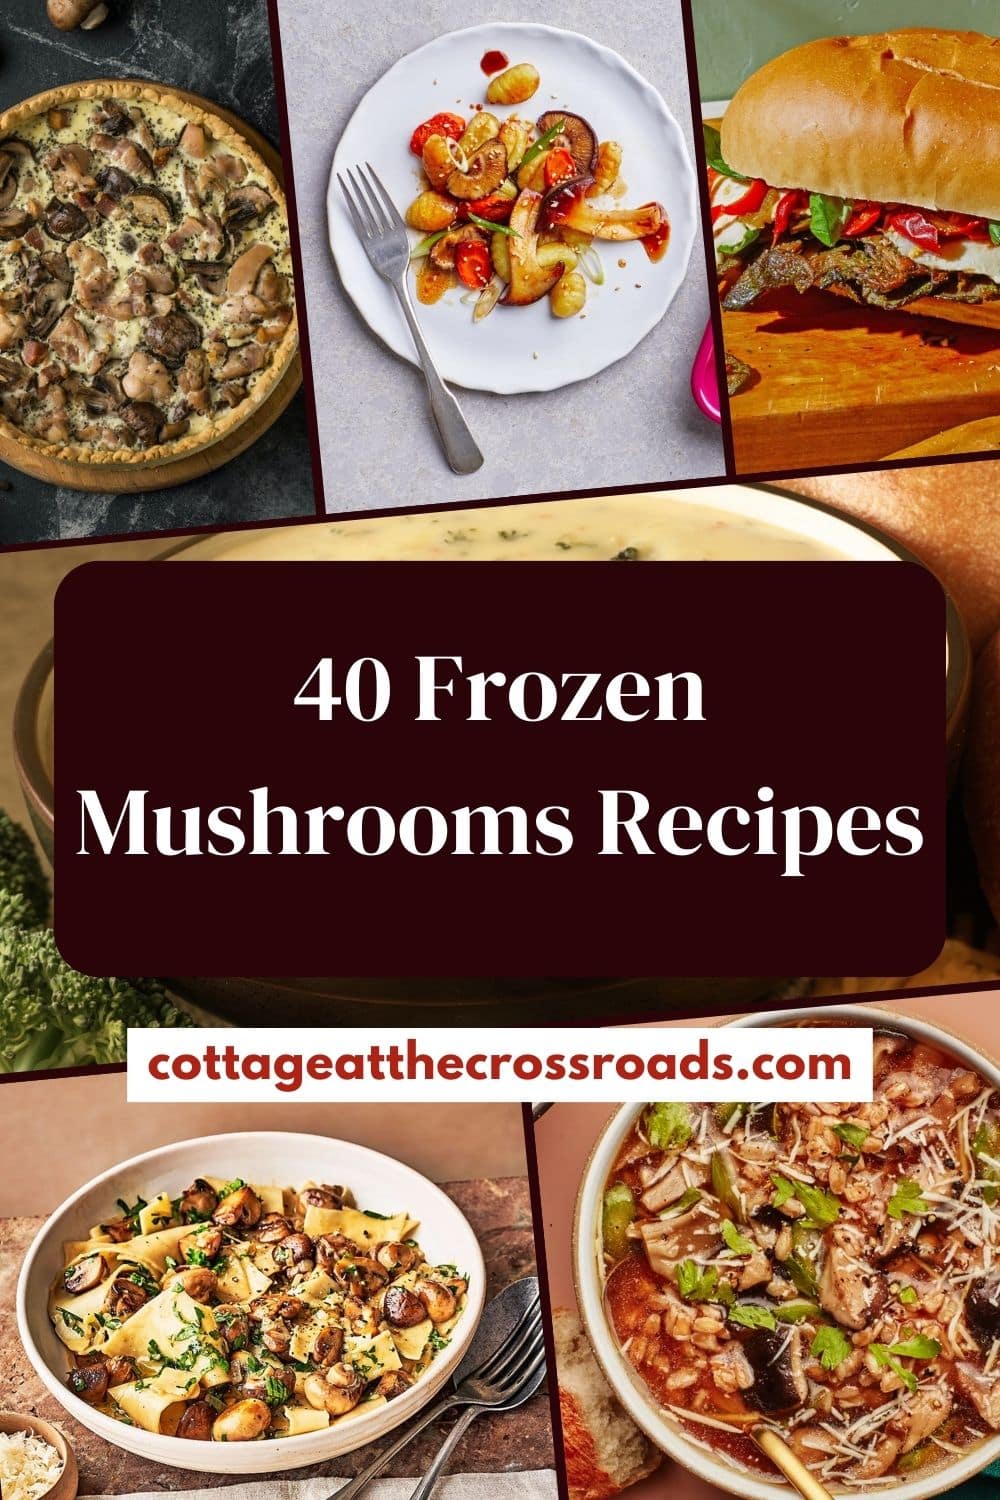 40 Frozen Mushrooms Recipes - Cottage at the Crossroads